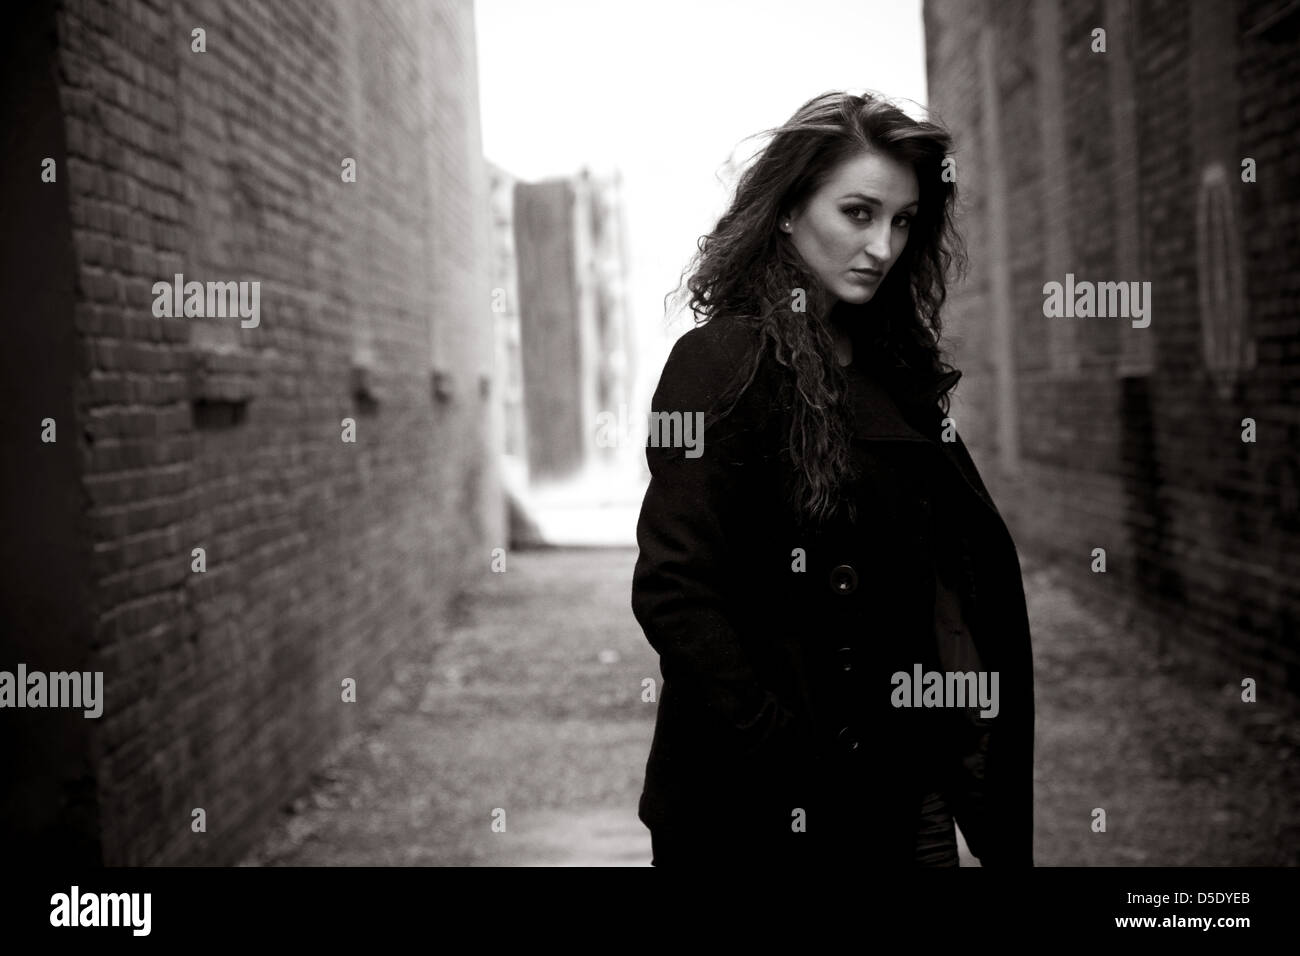 Woman in dark clothes rainy day in alley Stock Photo